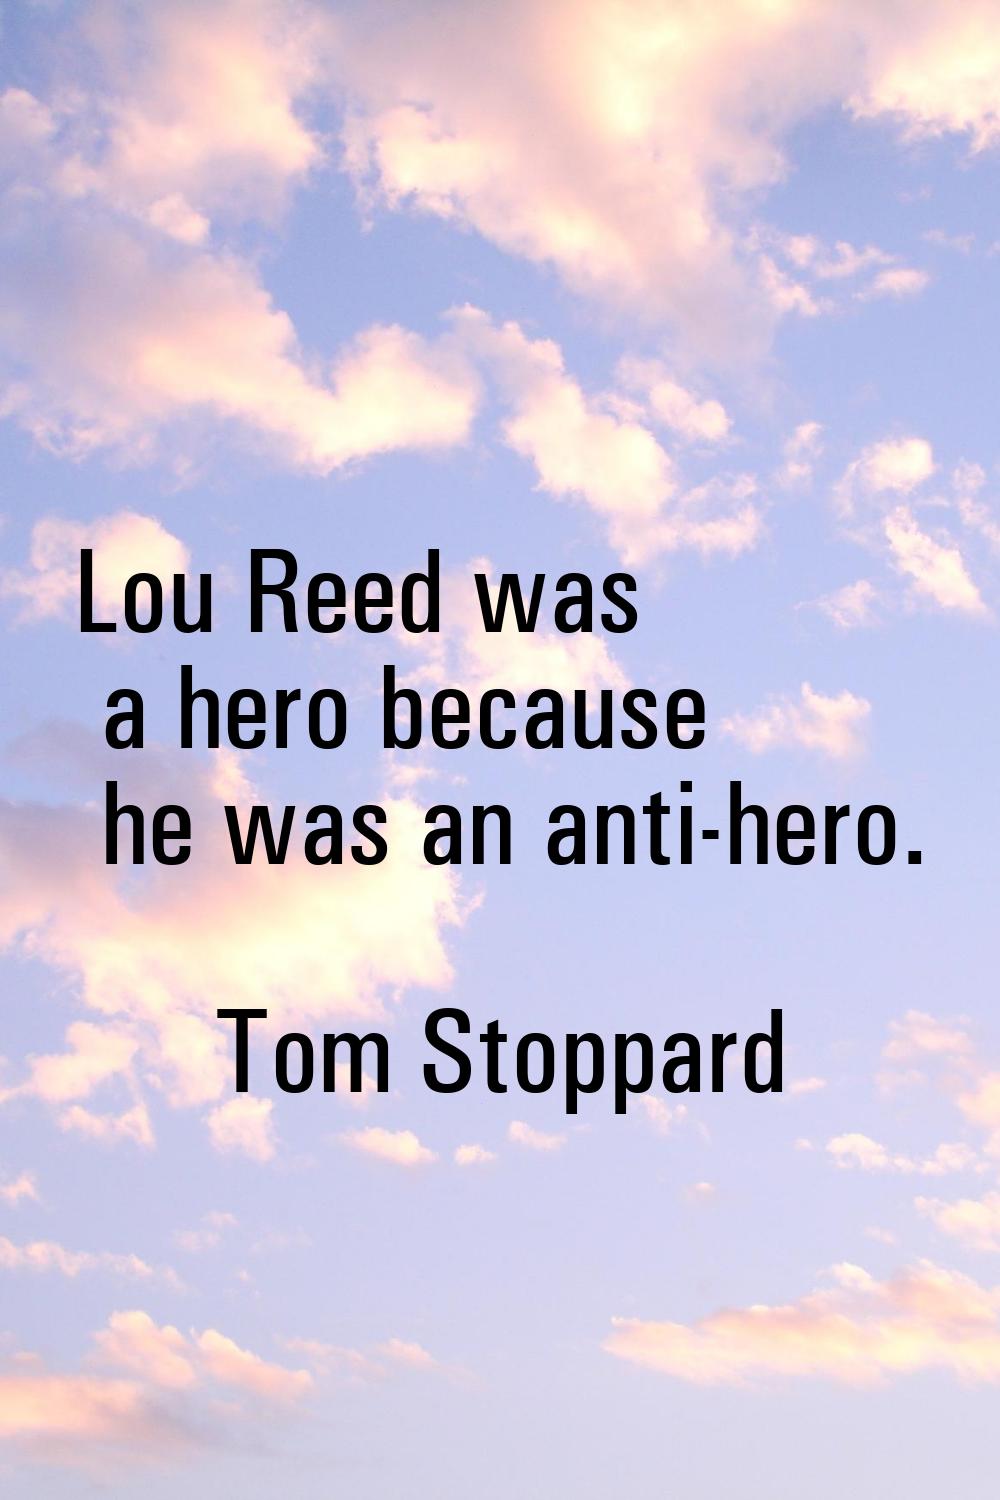 Lou Reed was a hero because he was an anti-hero.